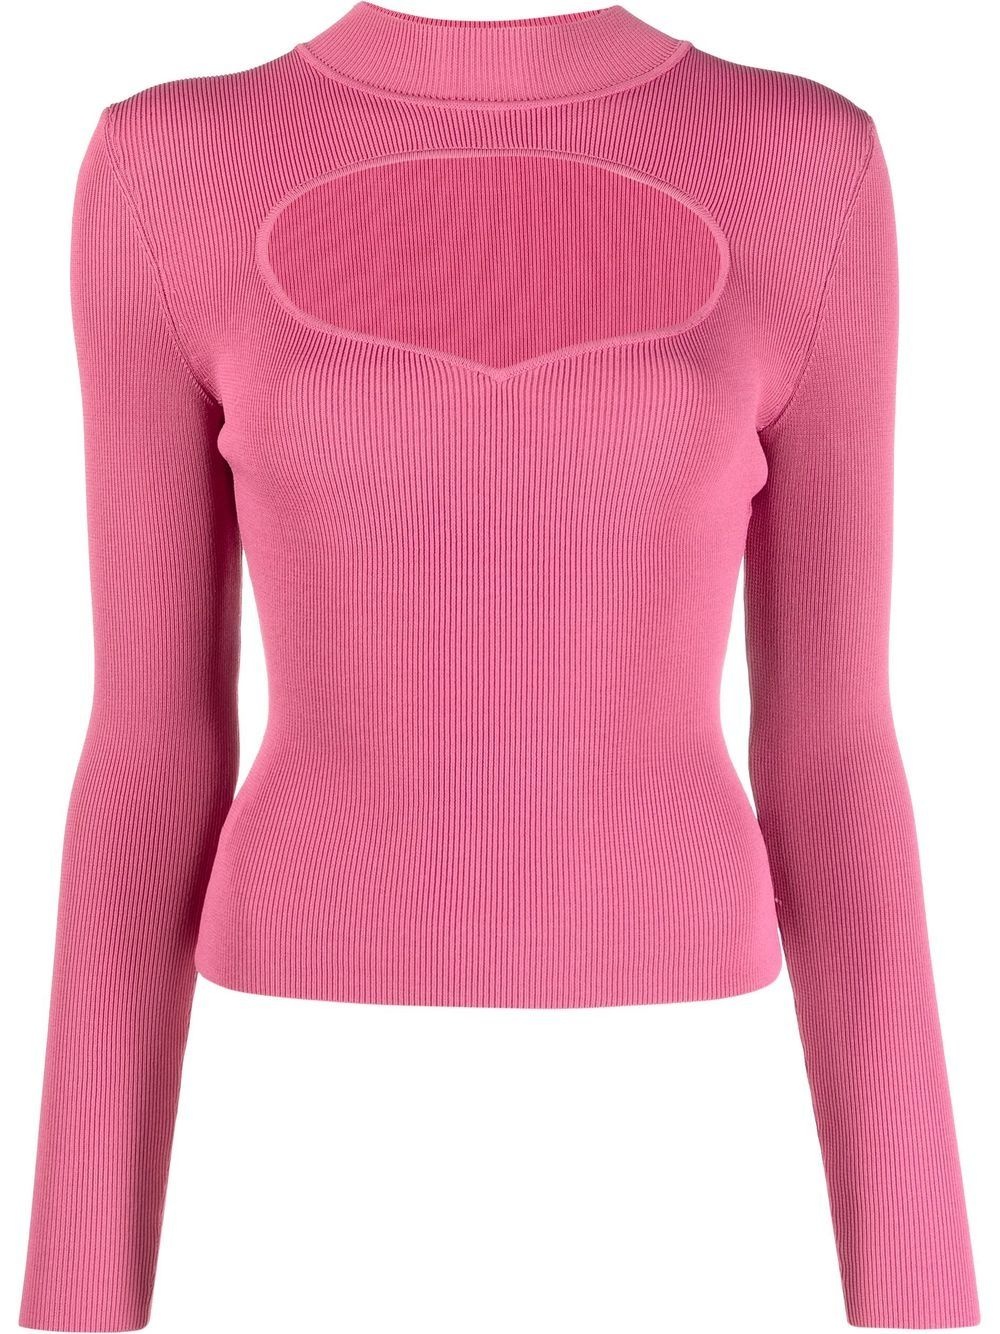 ribbed-knit cut-out jumper - 1